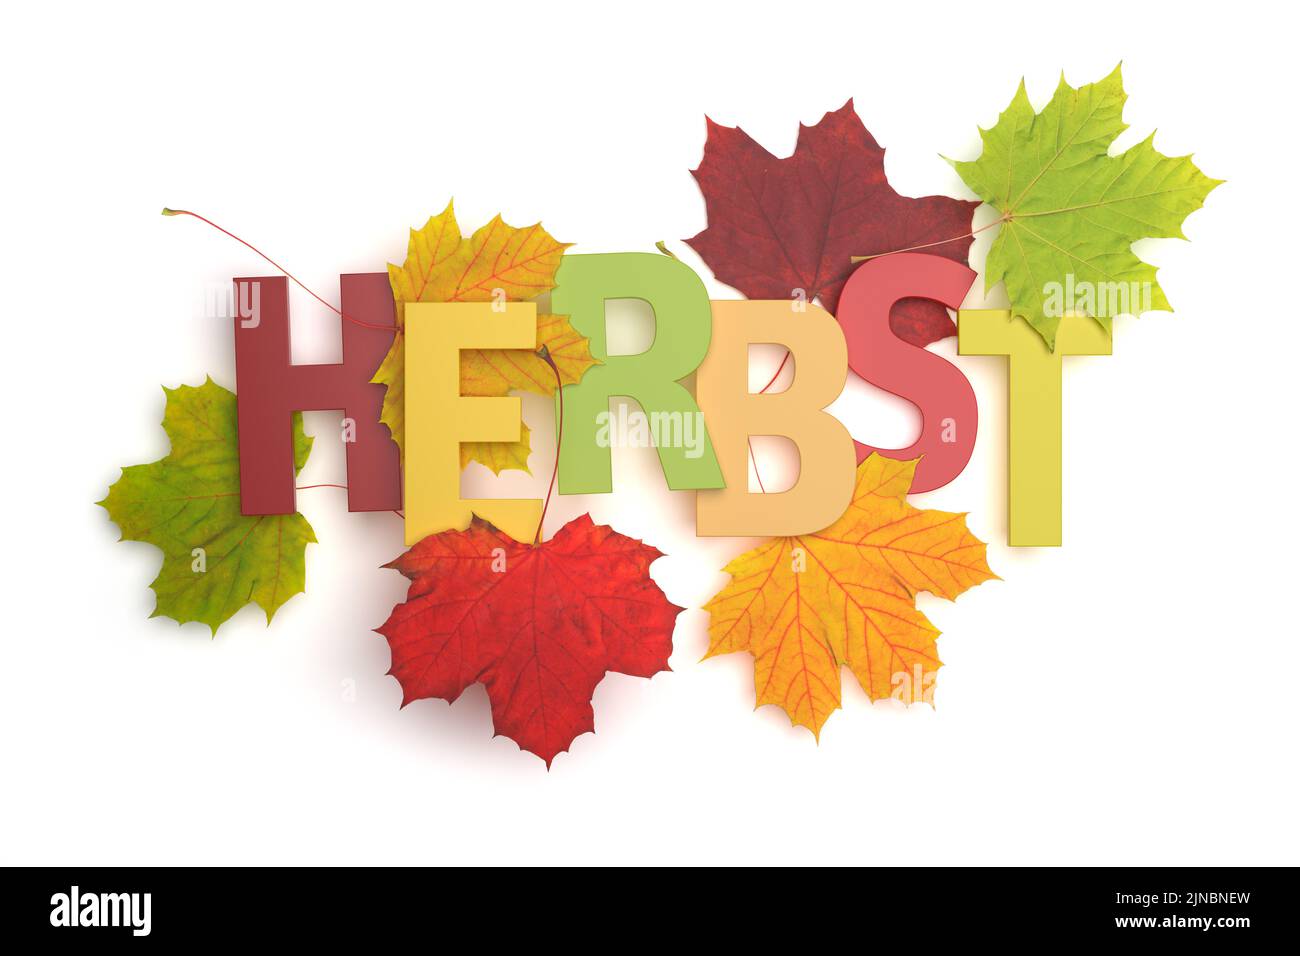 The german text 'Herbst' (Autumn) with coloful foliage around it isolated on white background Stock Photo